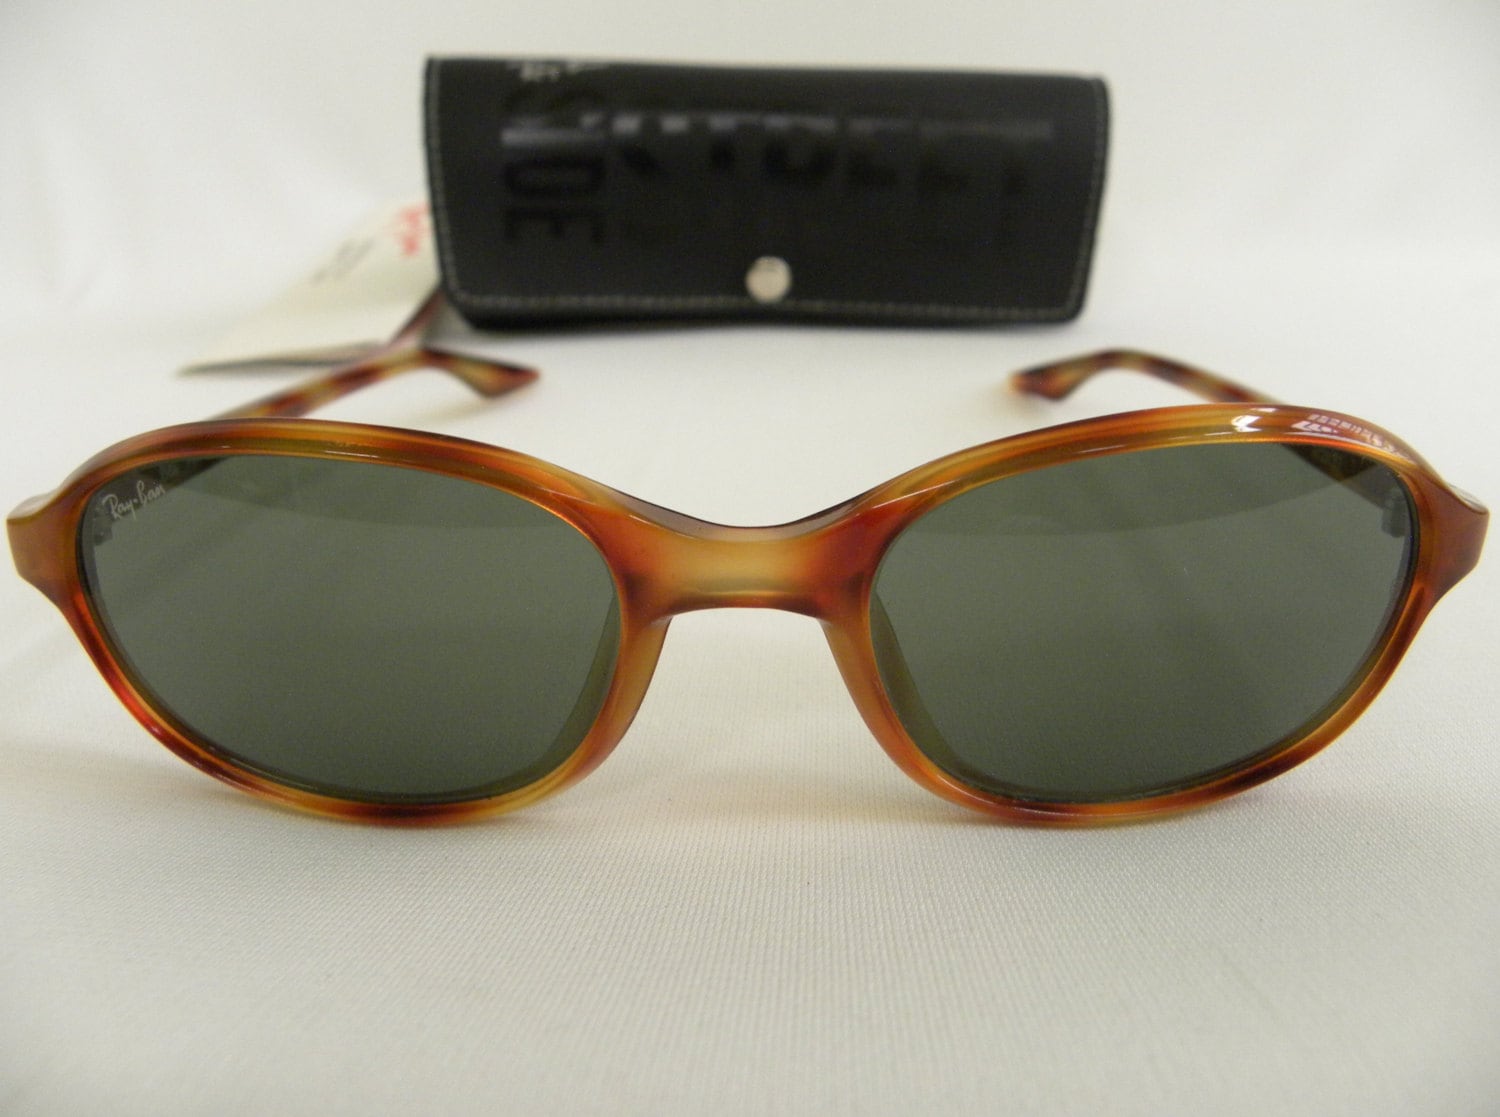 B&L RAY-BAN SUNGLASSES gunmetal Vintage RB8011 NEW Clearance Sale  Authentic